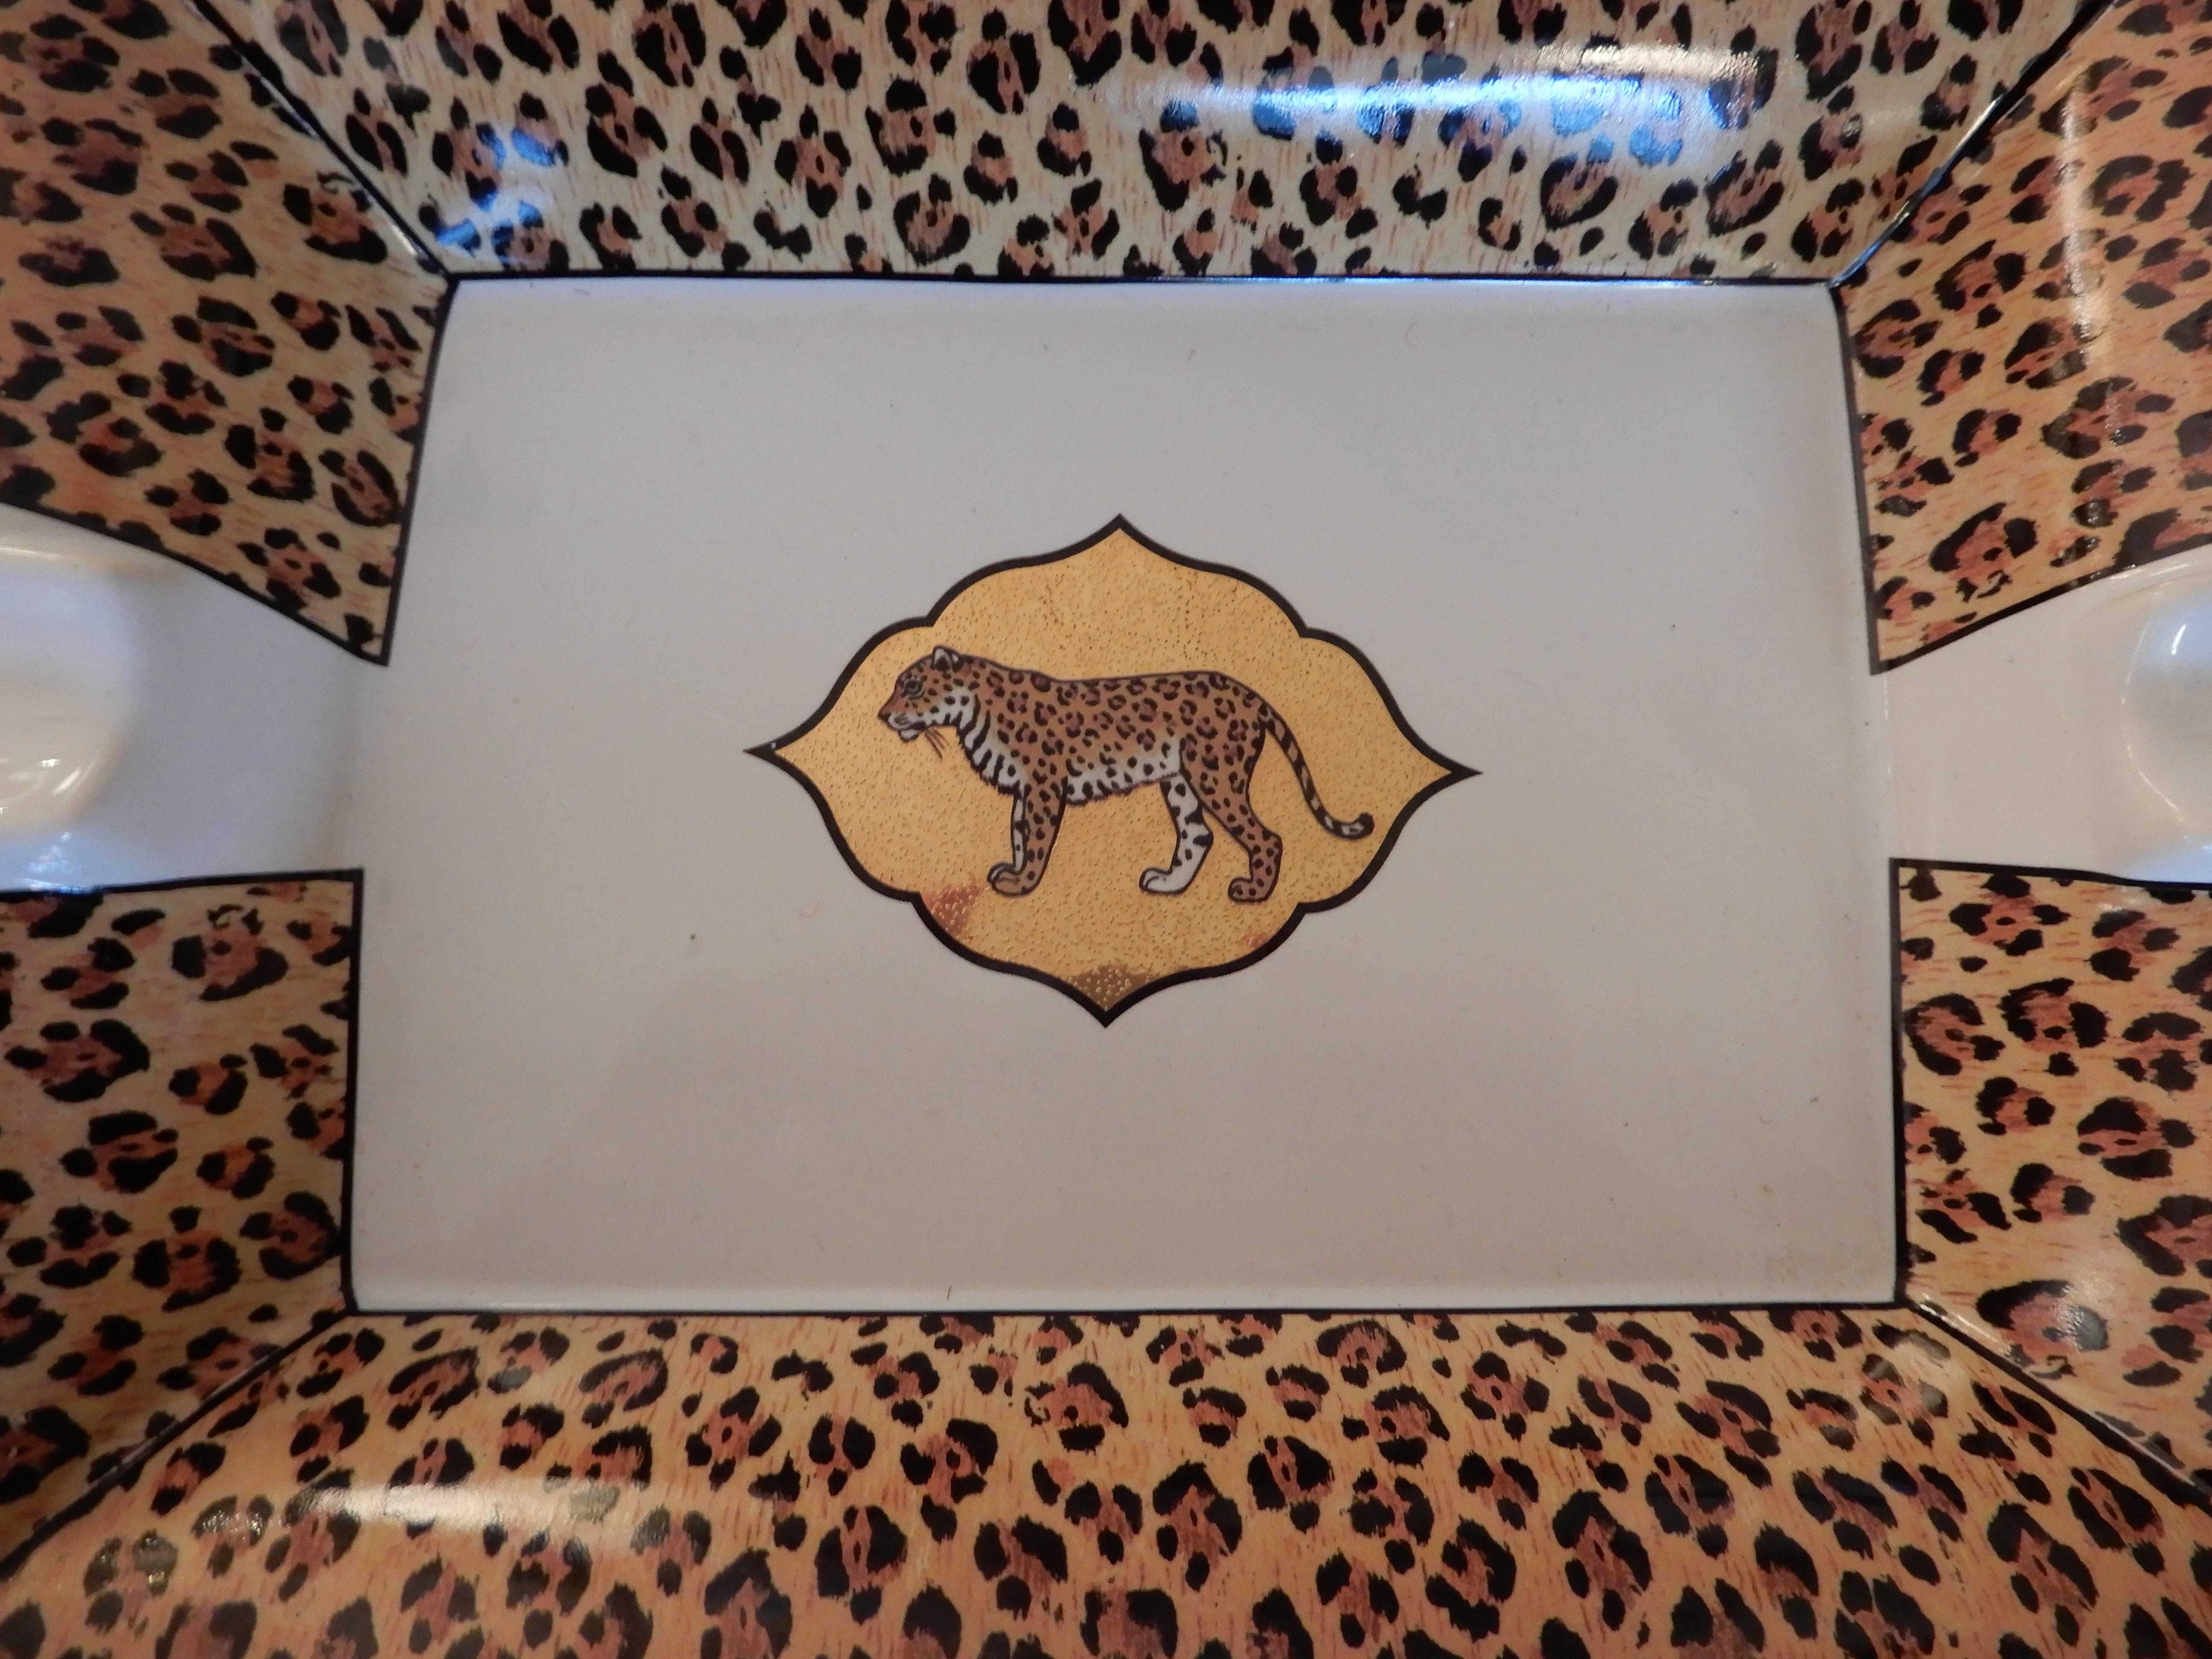 A rare handcrafted chase  ceramic 1990s leopard ashtray, hand-painted and tinted with 24-karat gold.